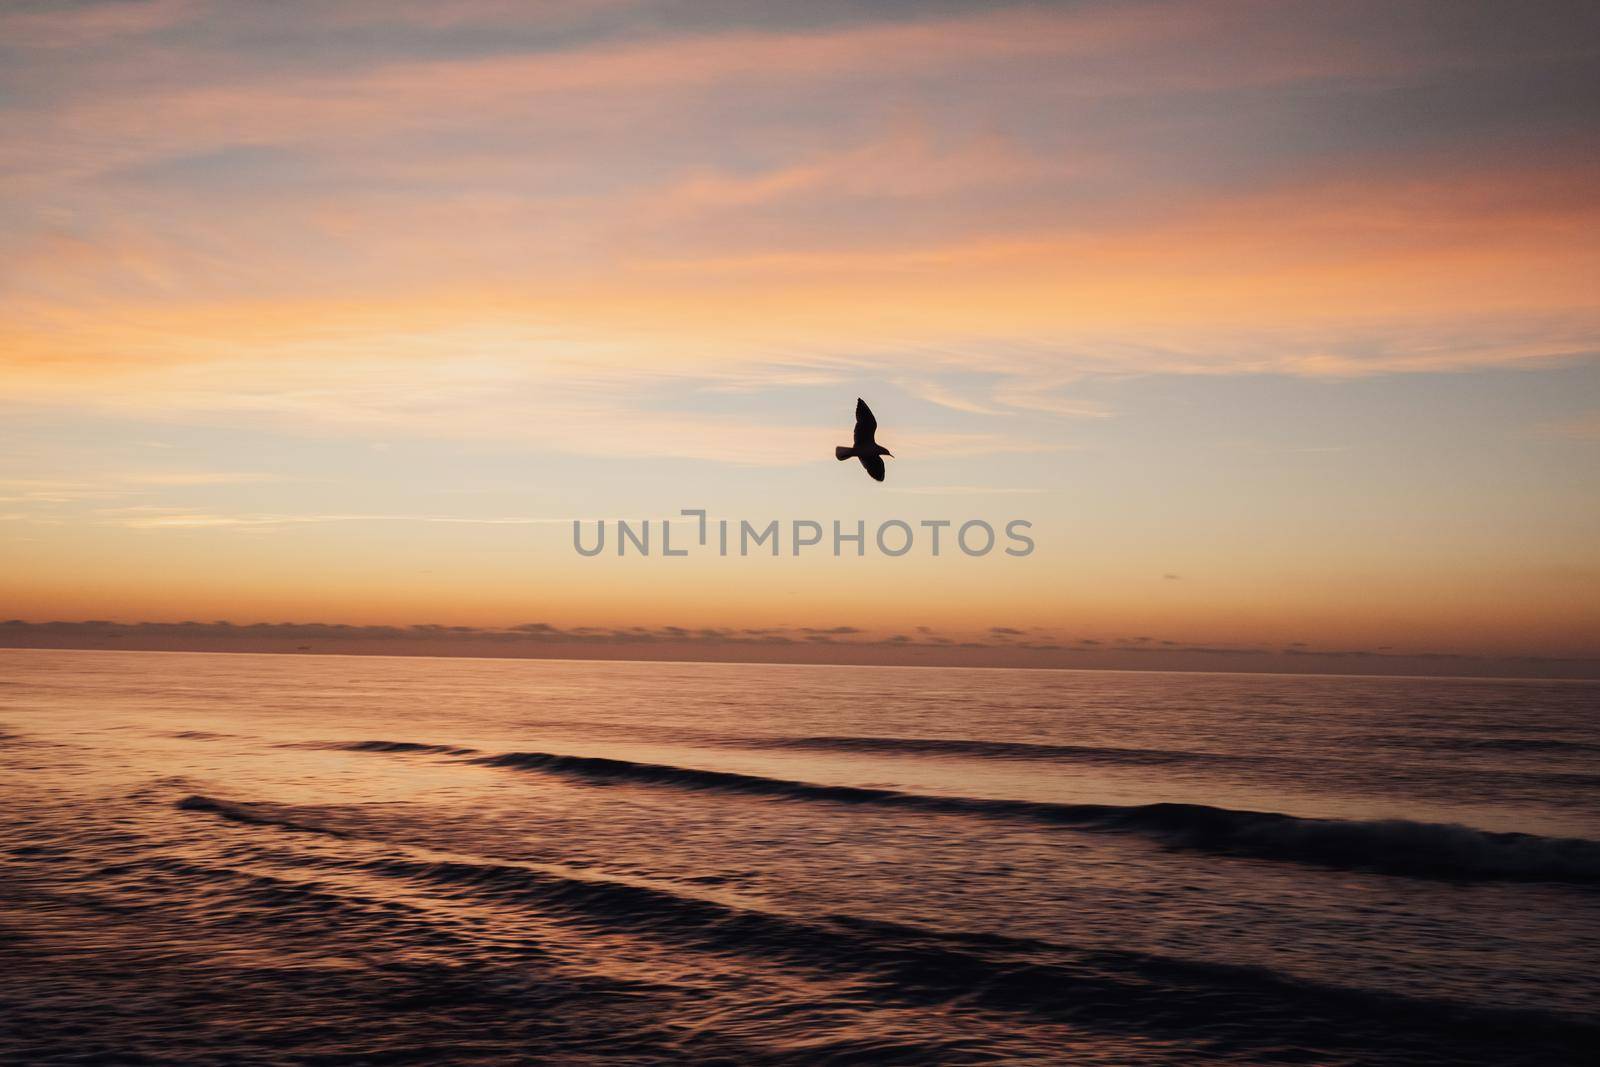 Seagull bird flies over sea at dawn, incredible sunrise and spectacular landscape